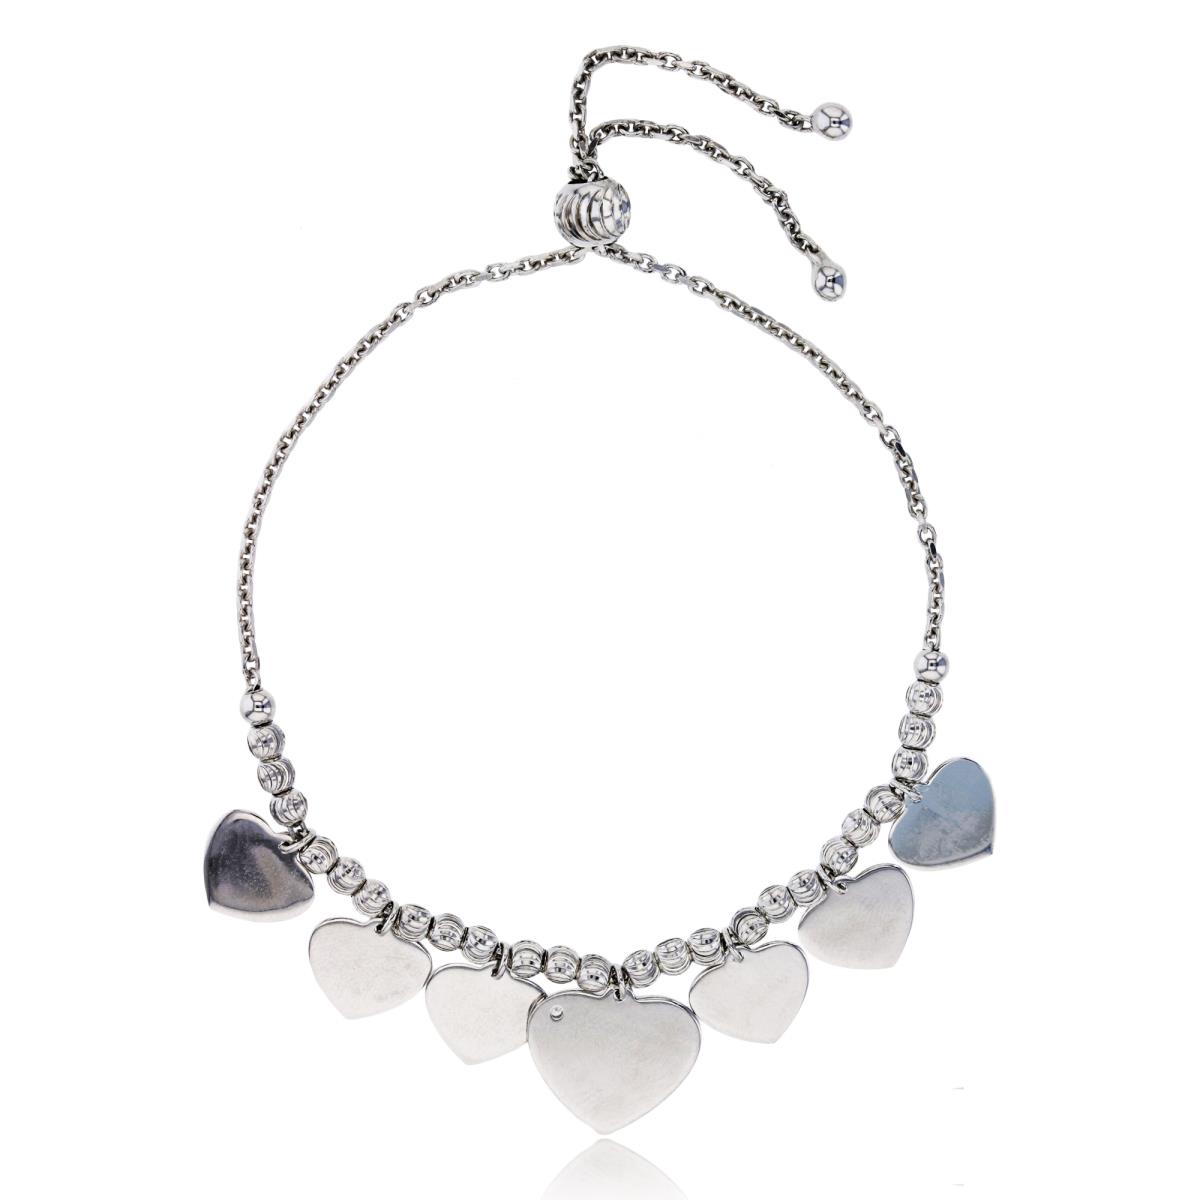 Sterling Silver Rhodium Polished Dangling Hearts with Moon Cut Bead Adjustable Bracelet